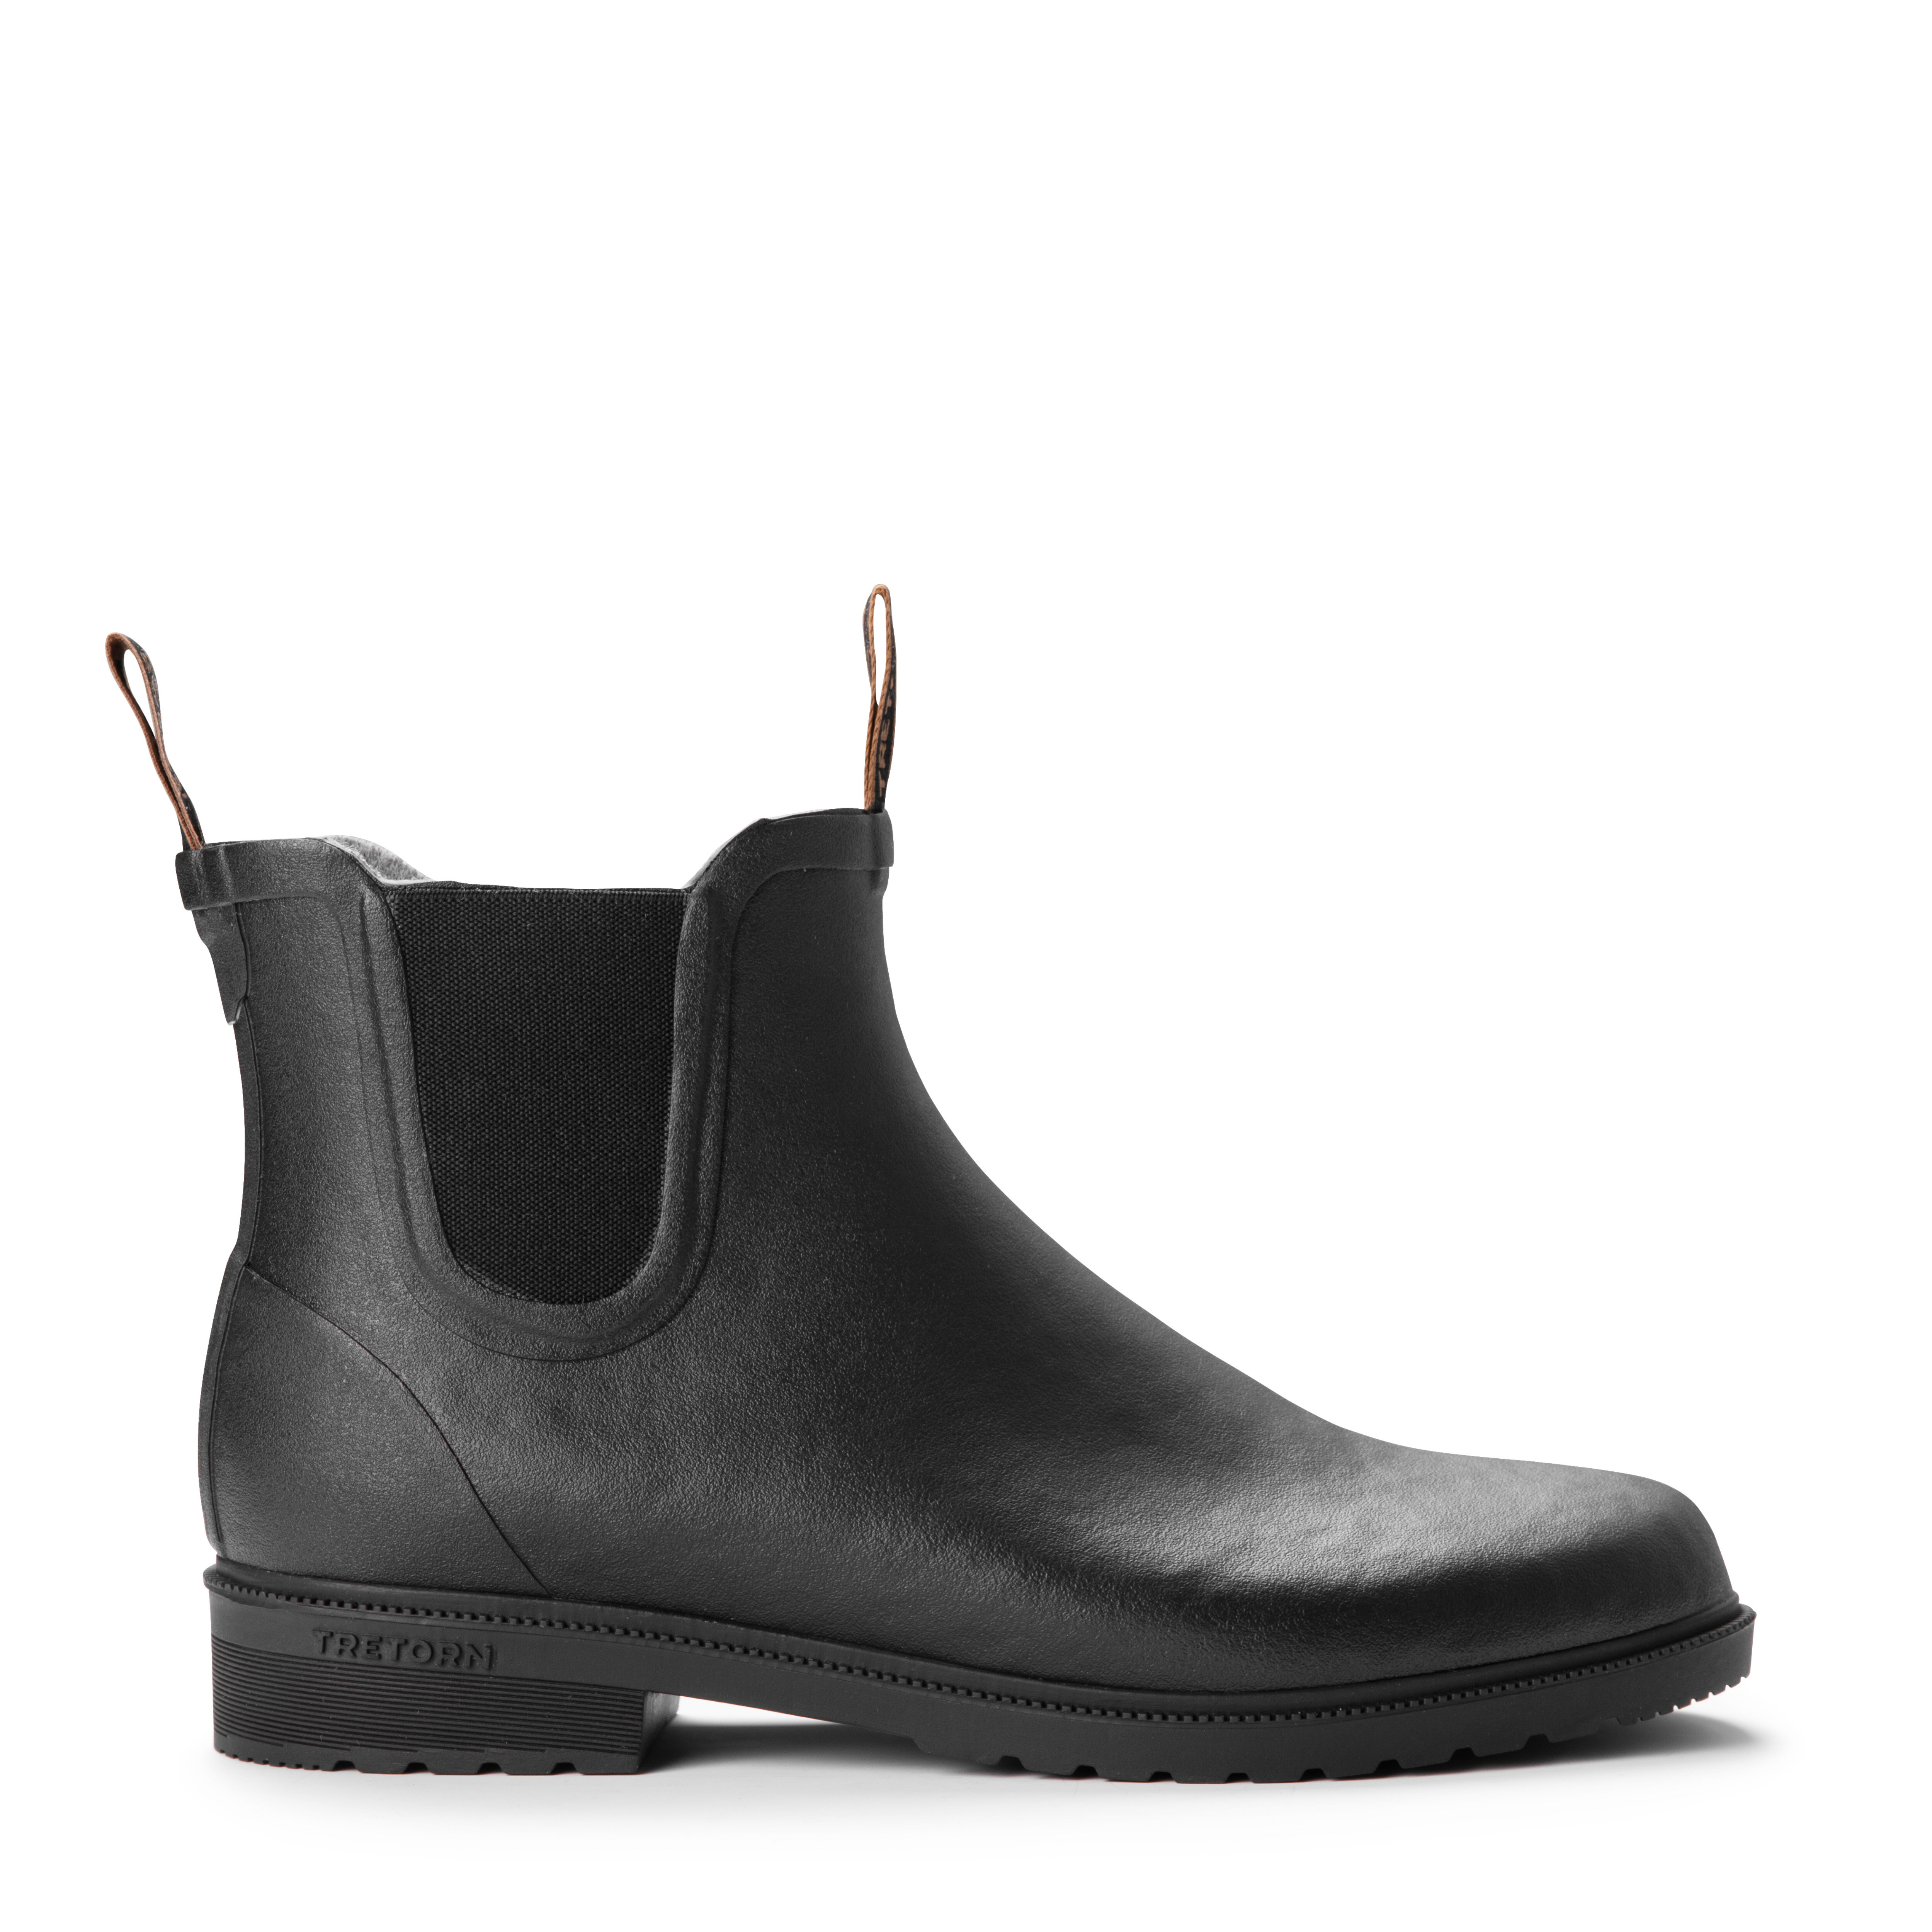 CHELSEA CLASSIC WOOL RUBBER BOOT